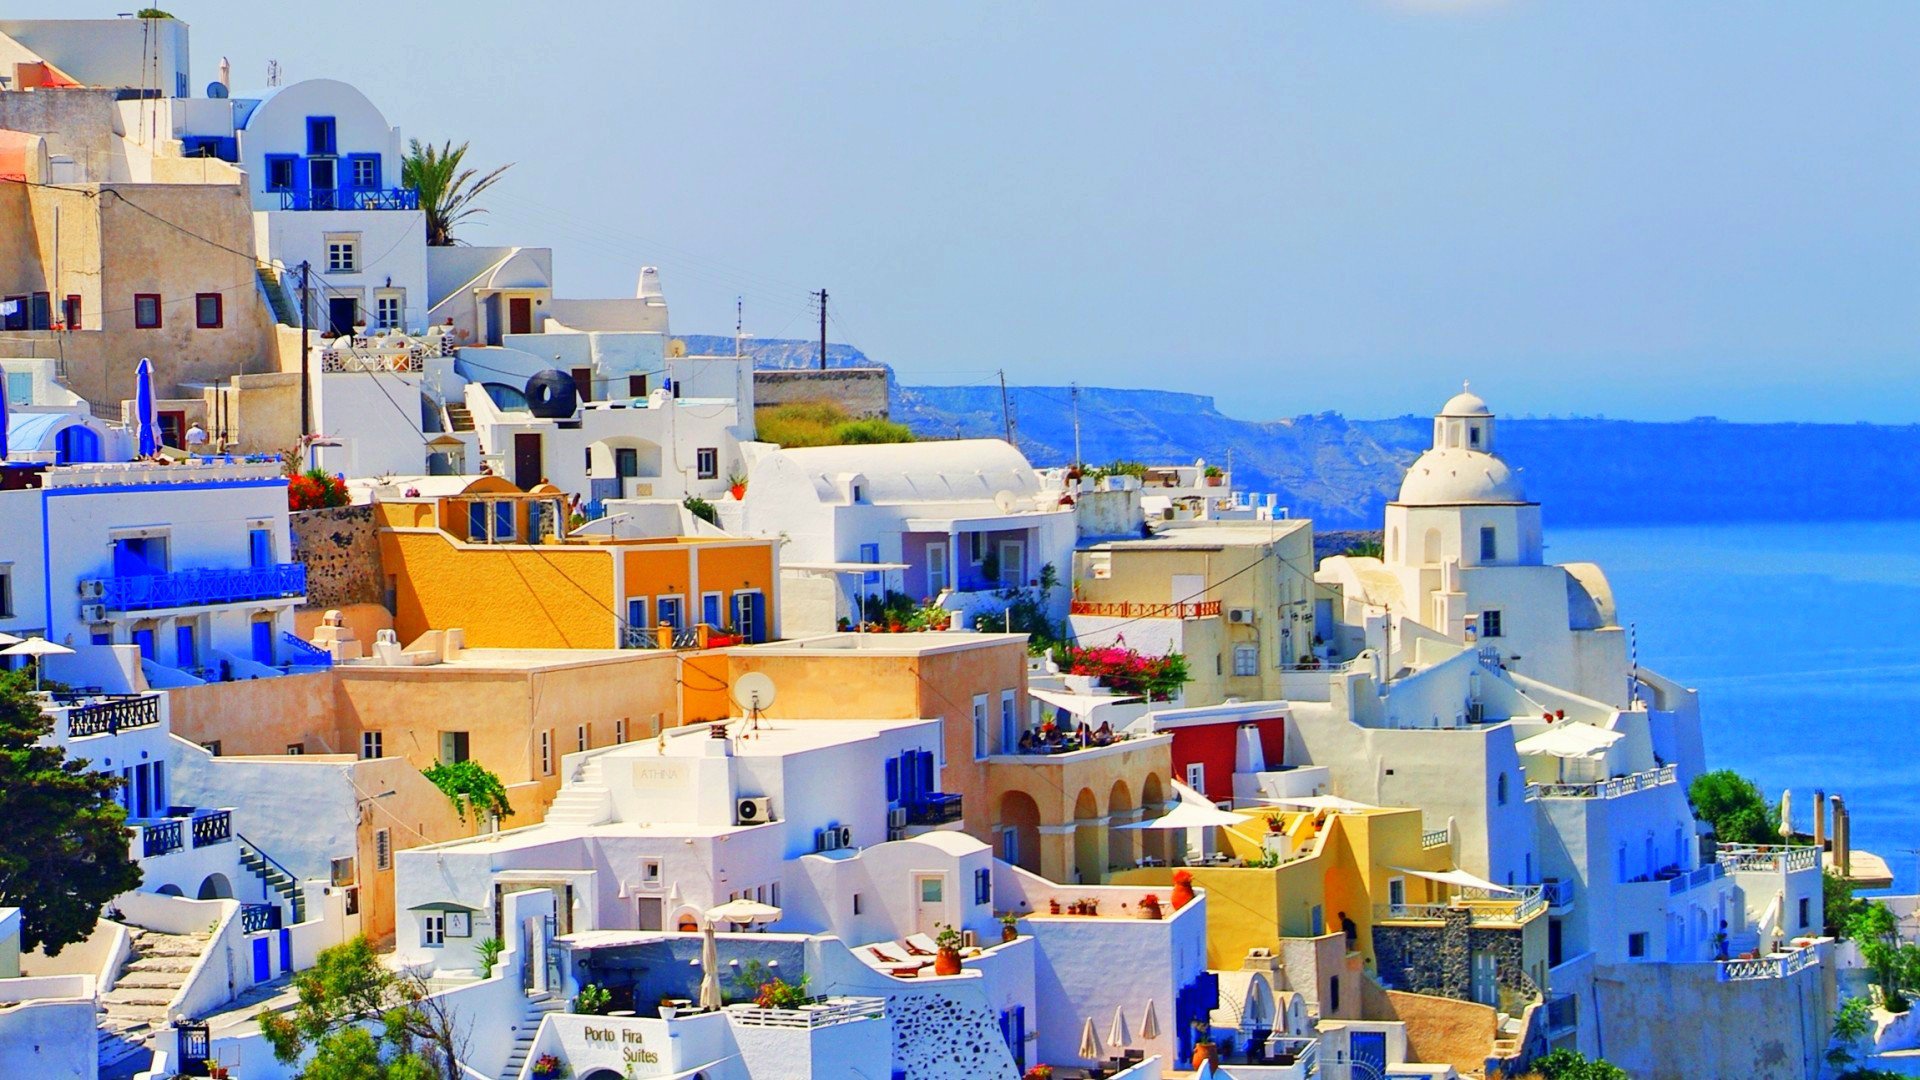 bright, santorini, man made, architecture, church, colors, greece, house, towns